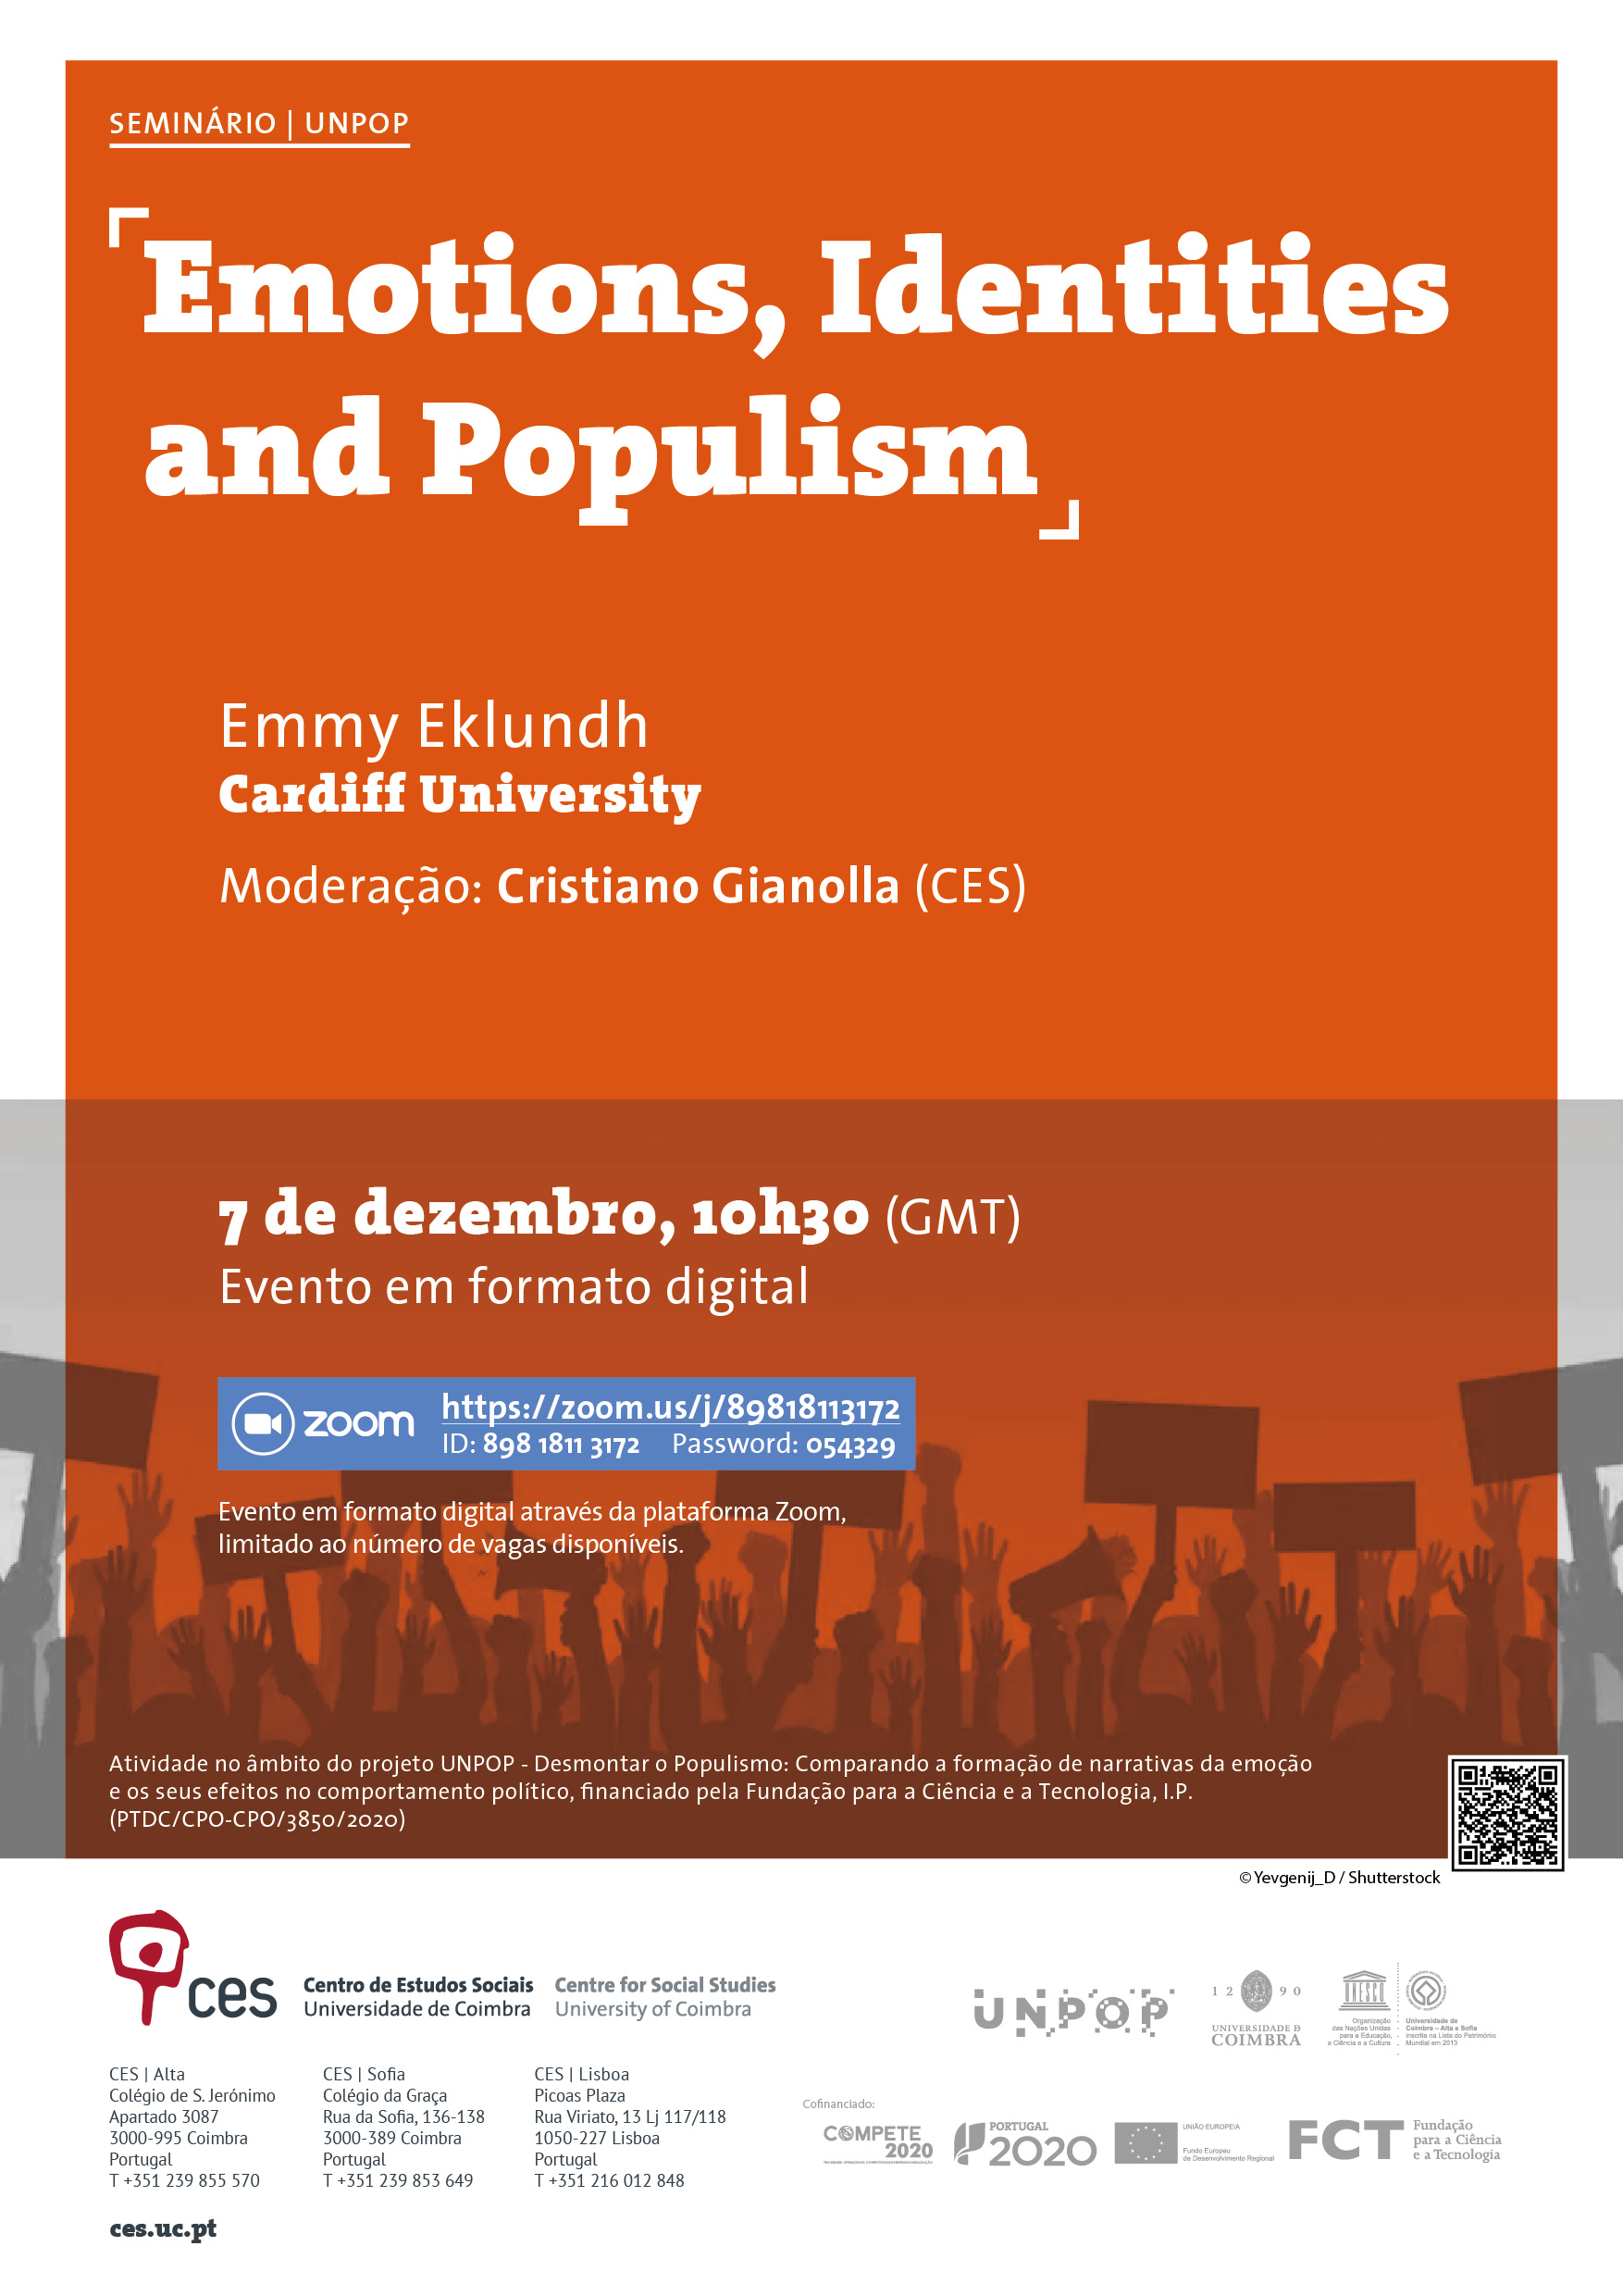 Emotions, Identities and Populism